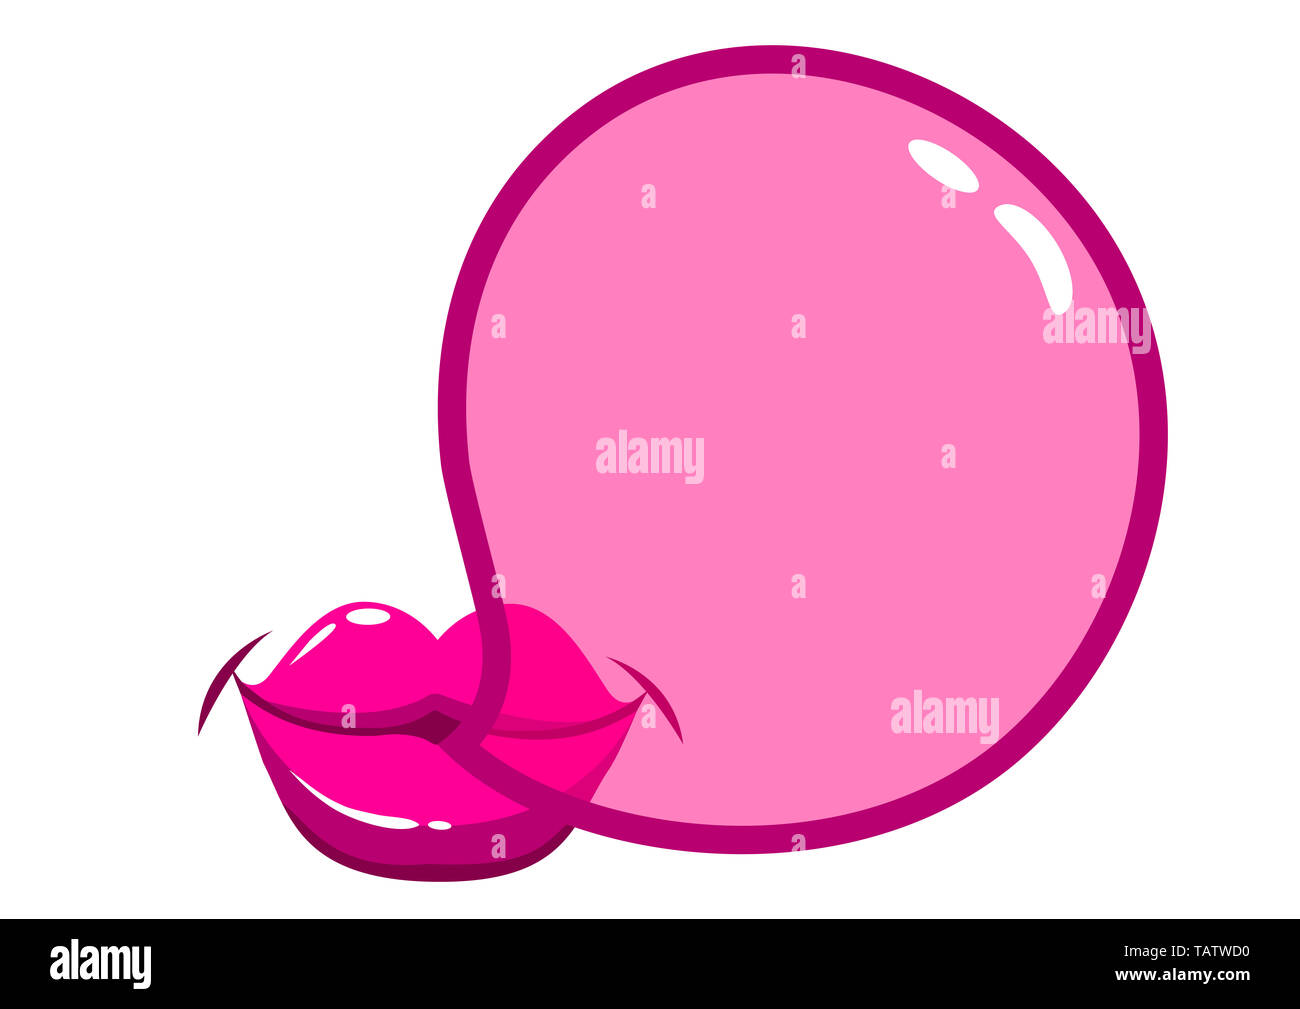 Illustration of a mouth blowing a bubblegum bubble. Stock Photo